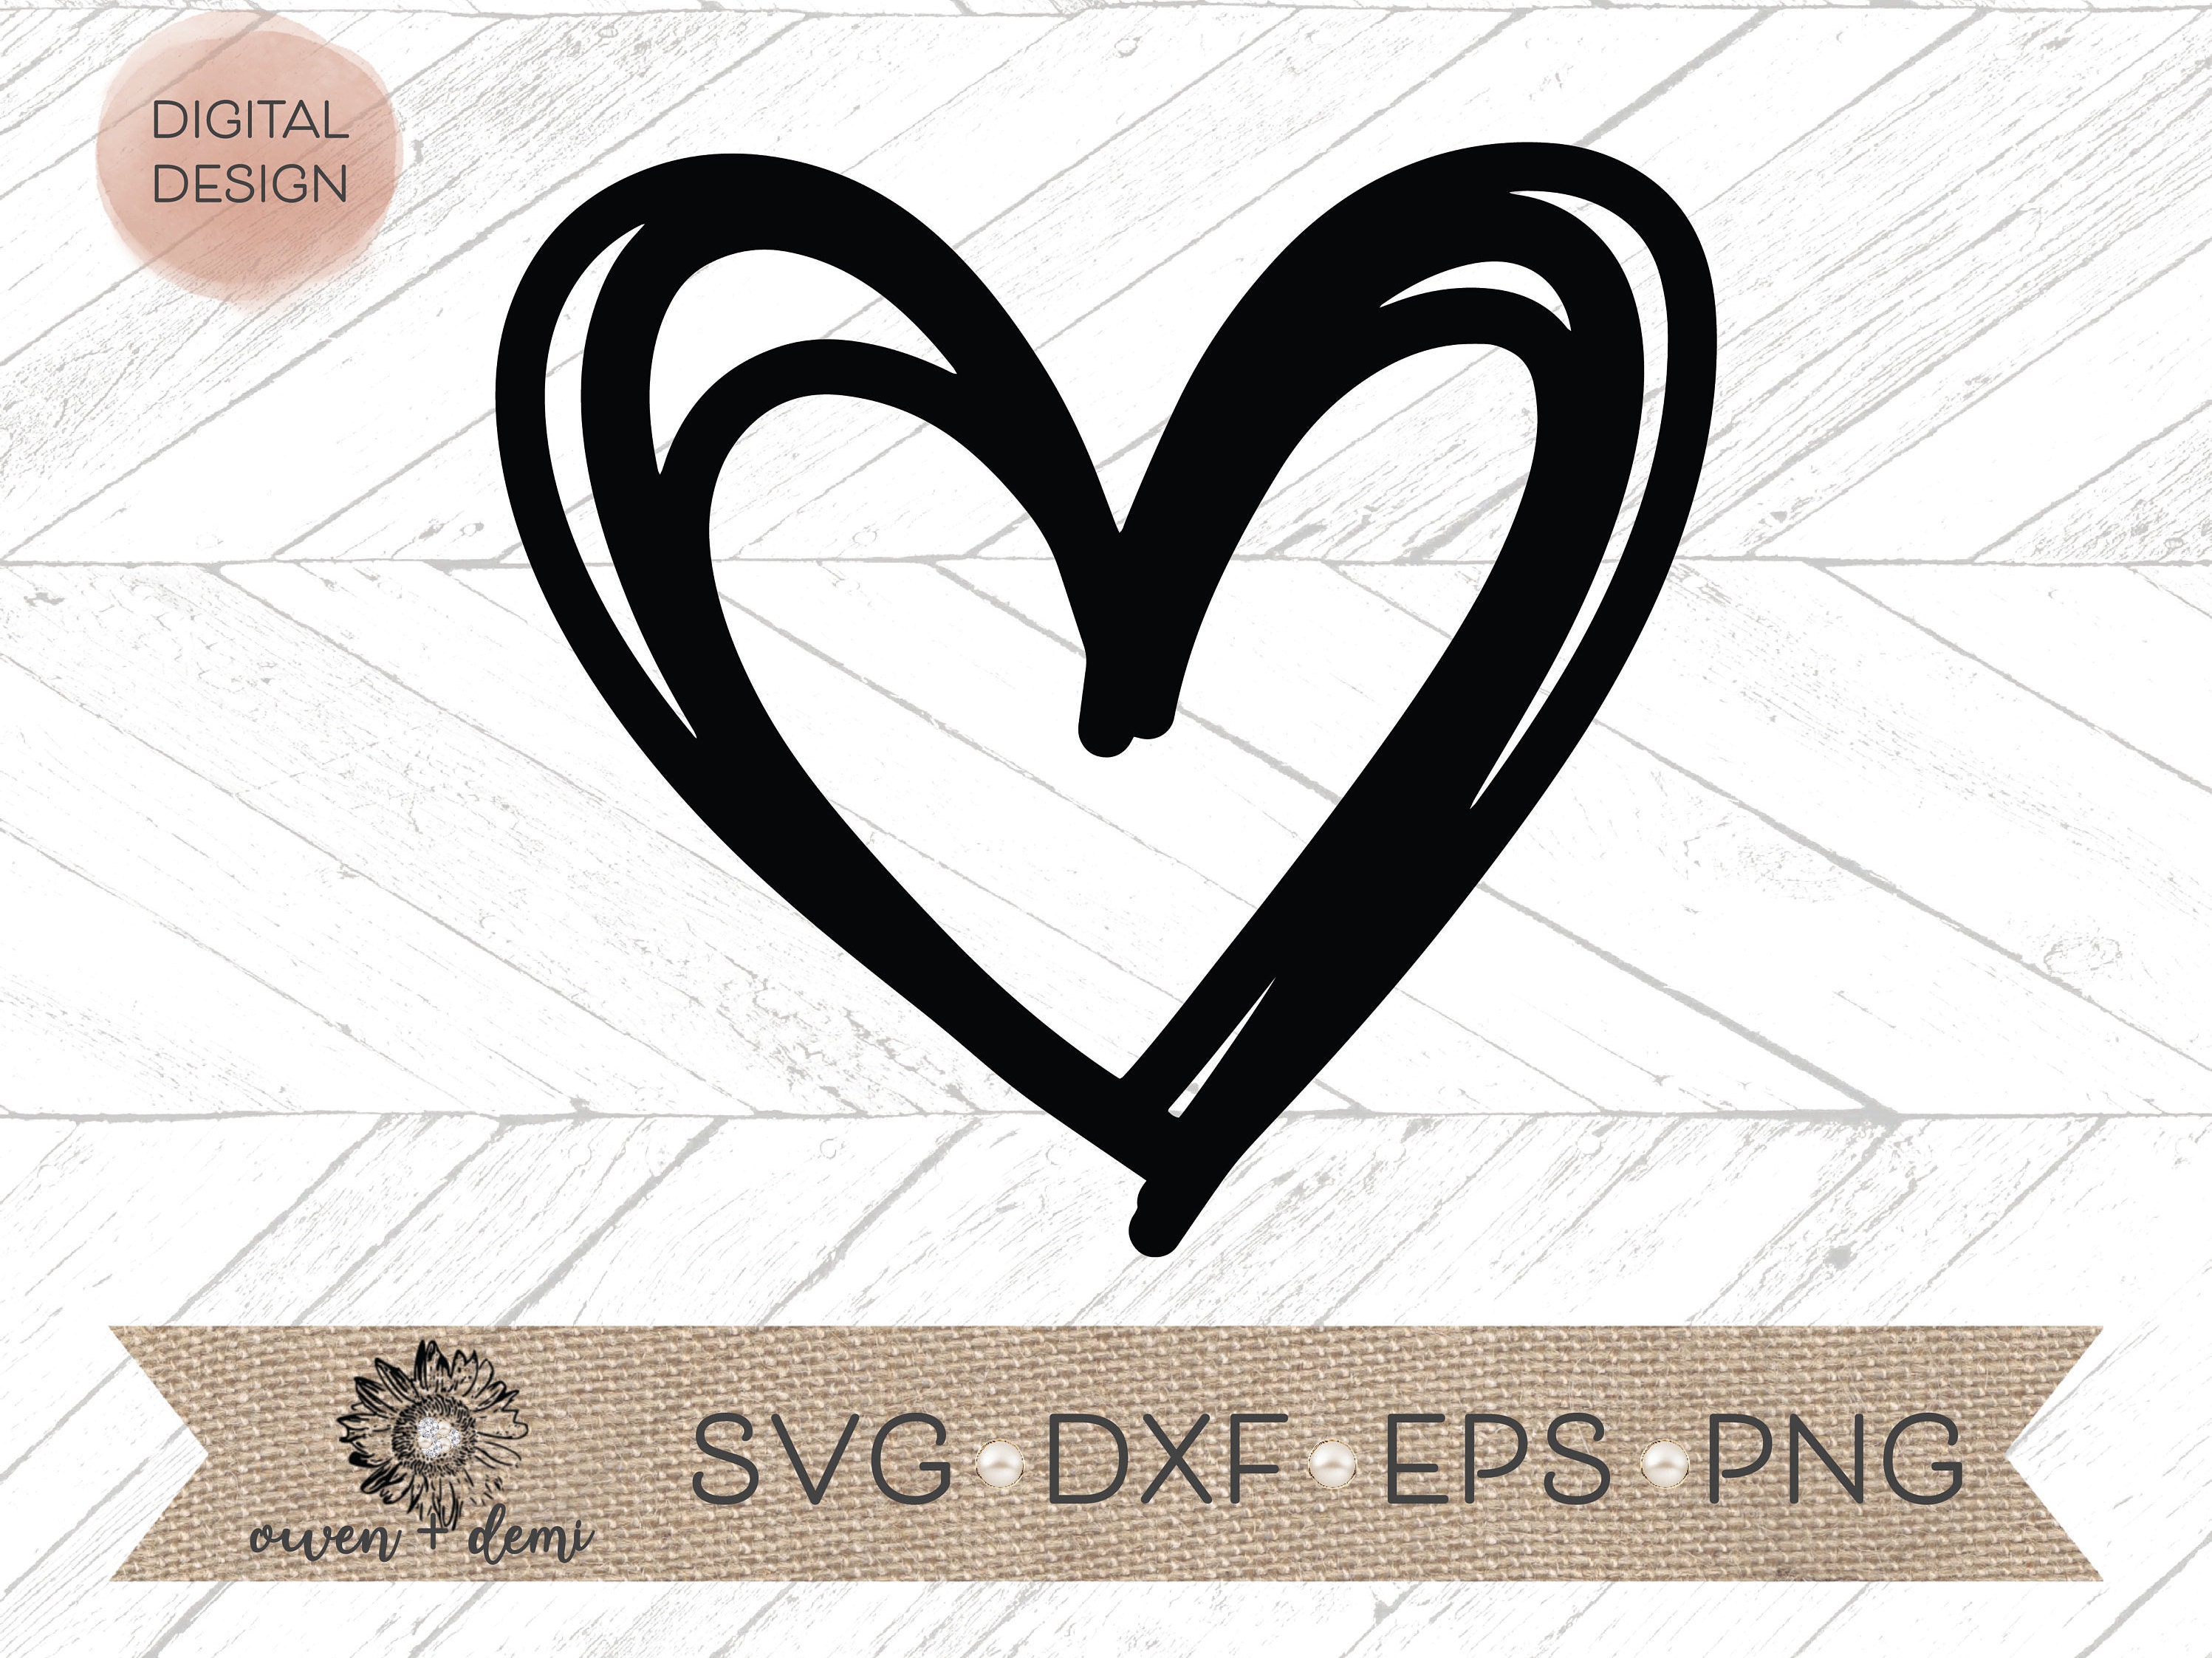 1 hand drawn scribble heart zip file containing 1 svg file, 1 dxf file, 1 e...